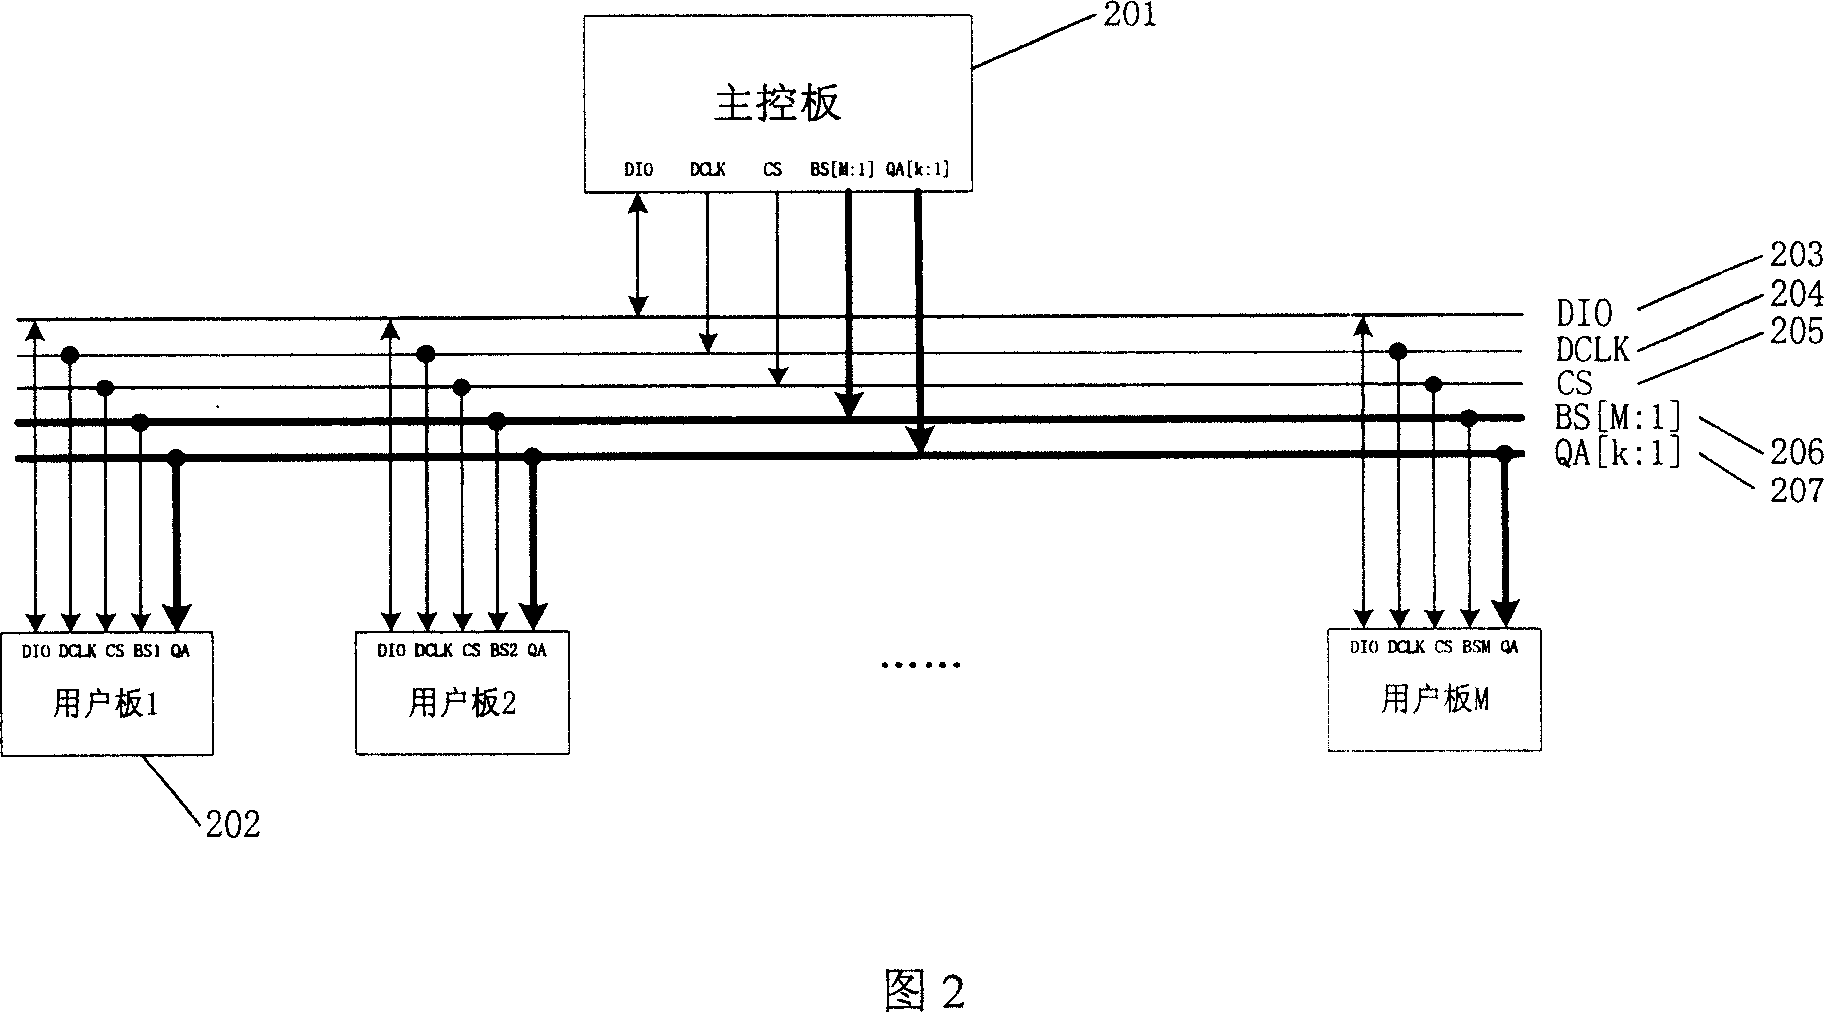 Apparatus for controlling and managing voice codec chip on user board